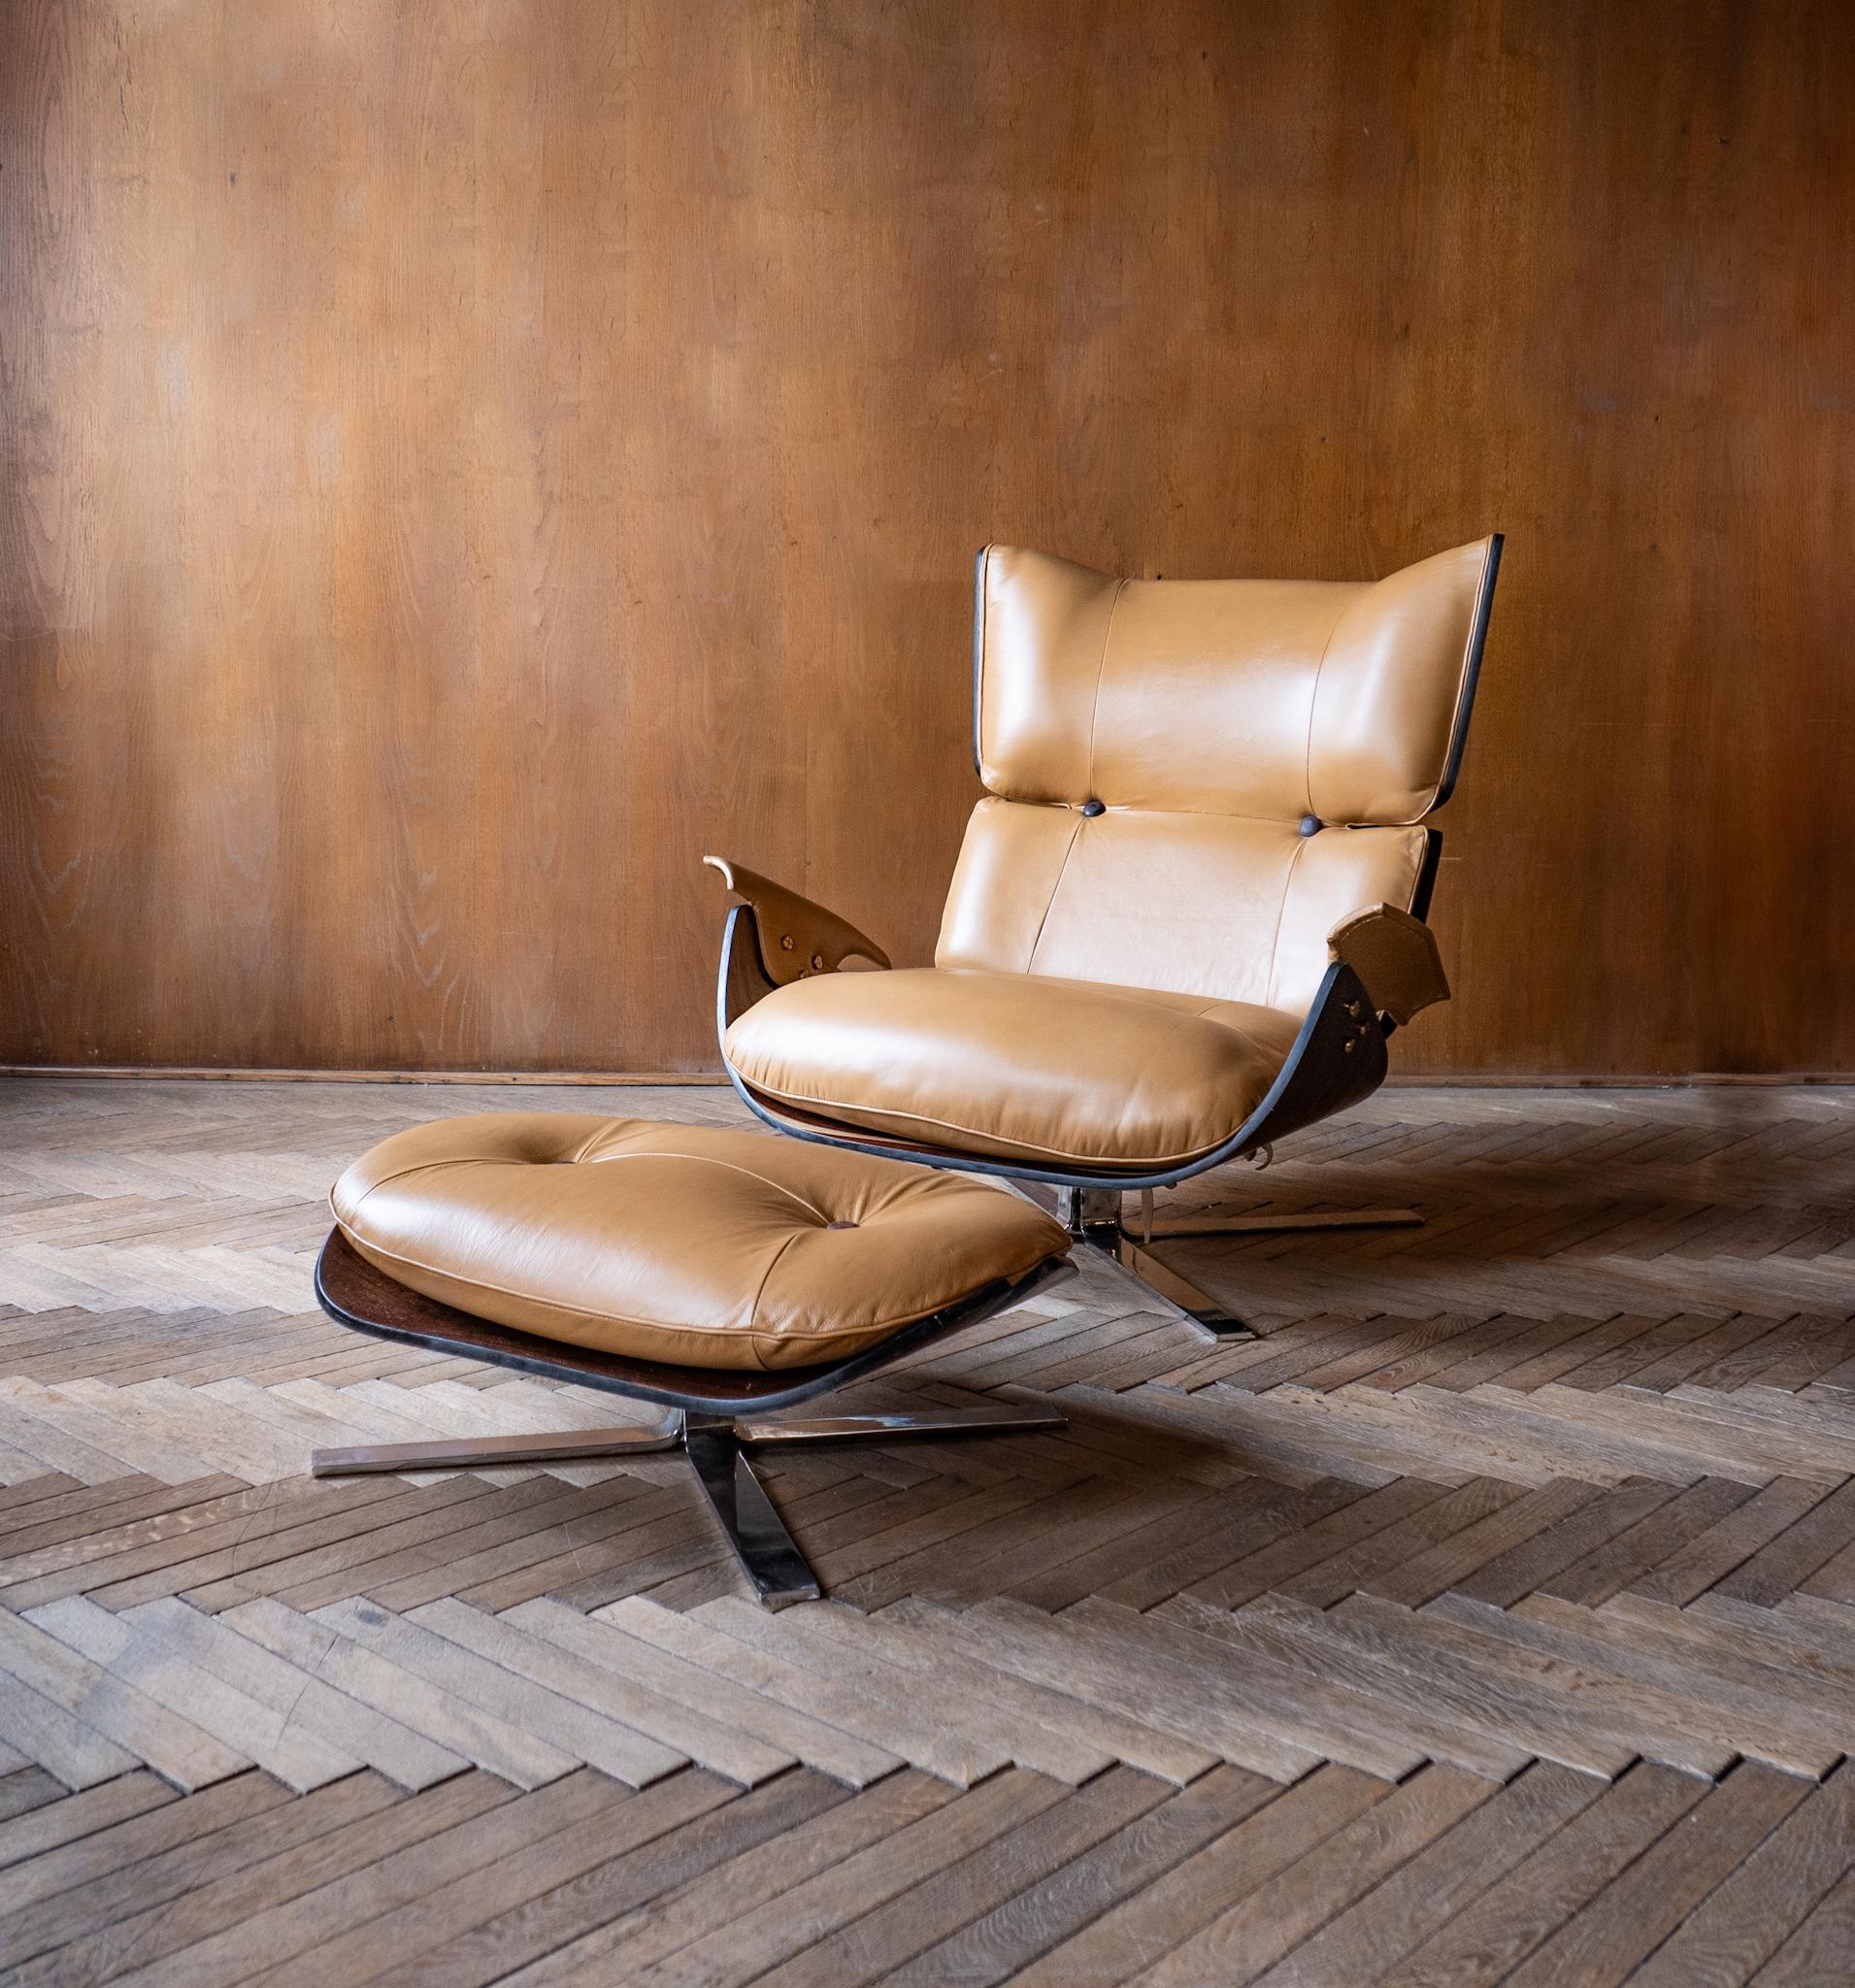 Mid-Century Modern Lounge Chair with Ottoman by Jorge Zalszupin, Brazil 1960s.

Iconic Lounge Chair and Ottoman Paulistana designed by the famous brazilian designer Jorge Zalszupin in the 60s and produced by L’Atelier Moveis (original label at the